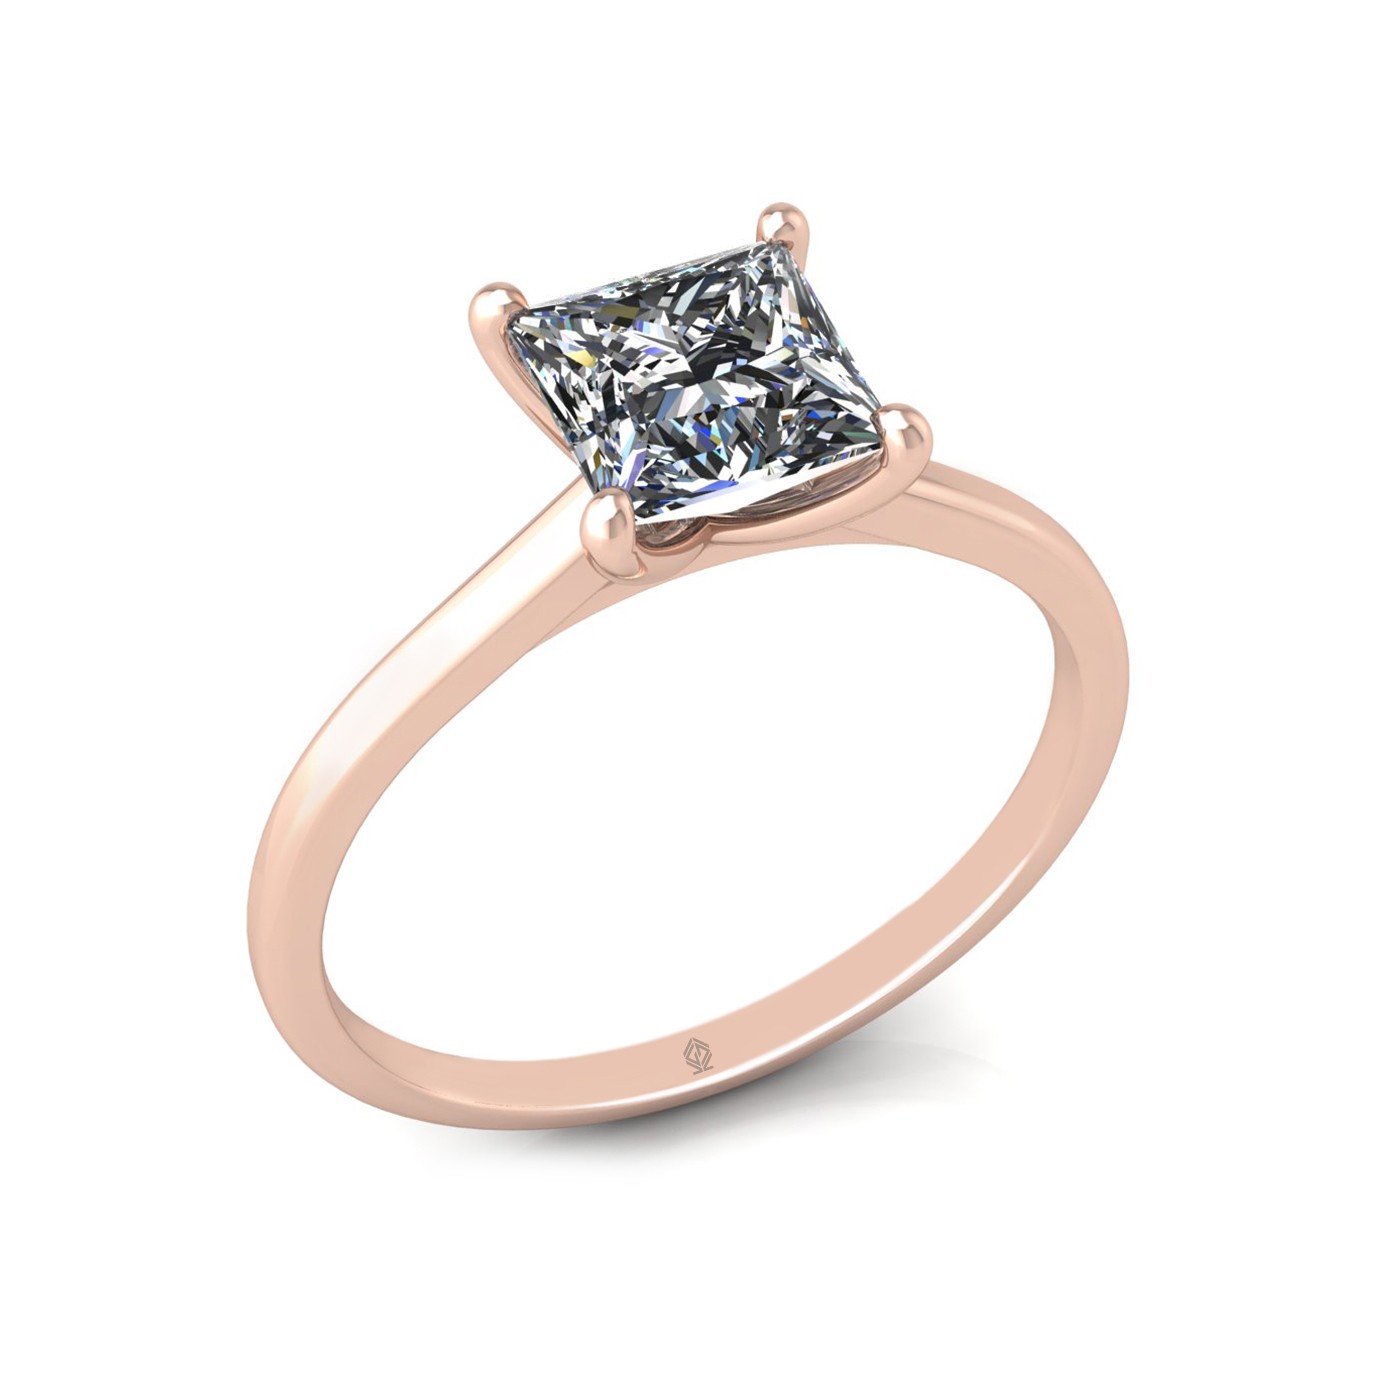 18k rose gold  1,20 ct 4 prongs solitaire princess cut diamond engagement ring with whisper thin band